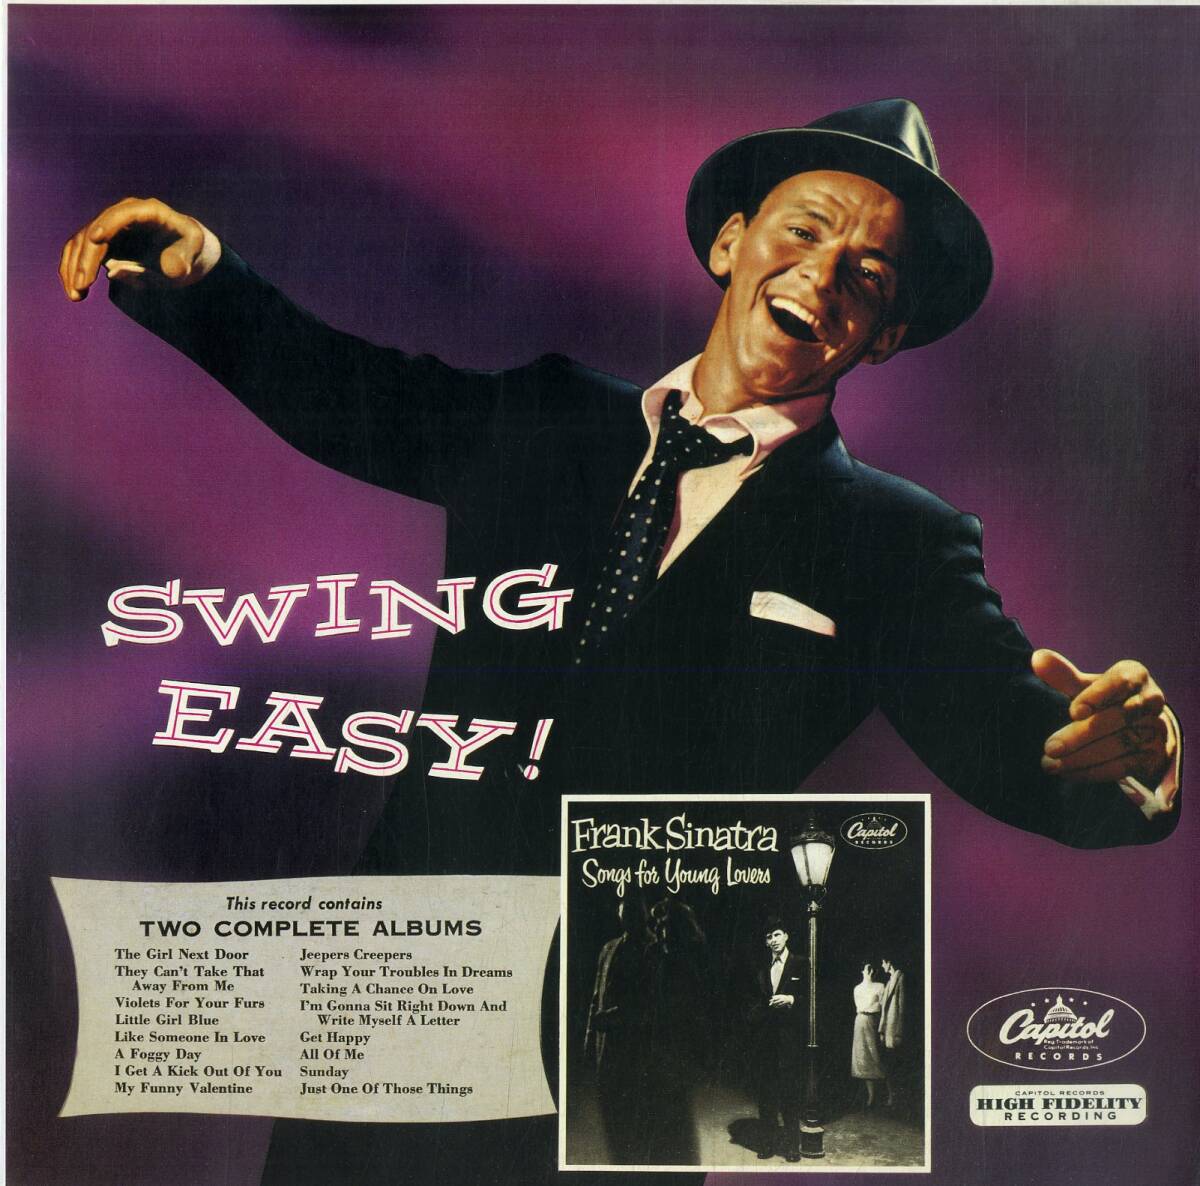 A00592123/LP/フランク・シナトラ (FRANK SINATRA)「Swing Easy! And Songs For Young Lovers (1991年・SGD-87・ヴォーカル・スウィングJの画像1